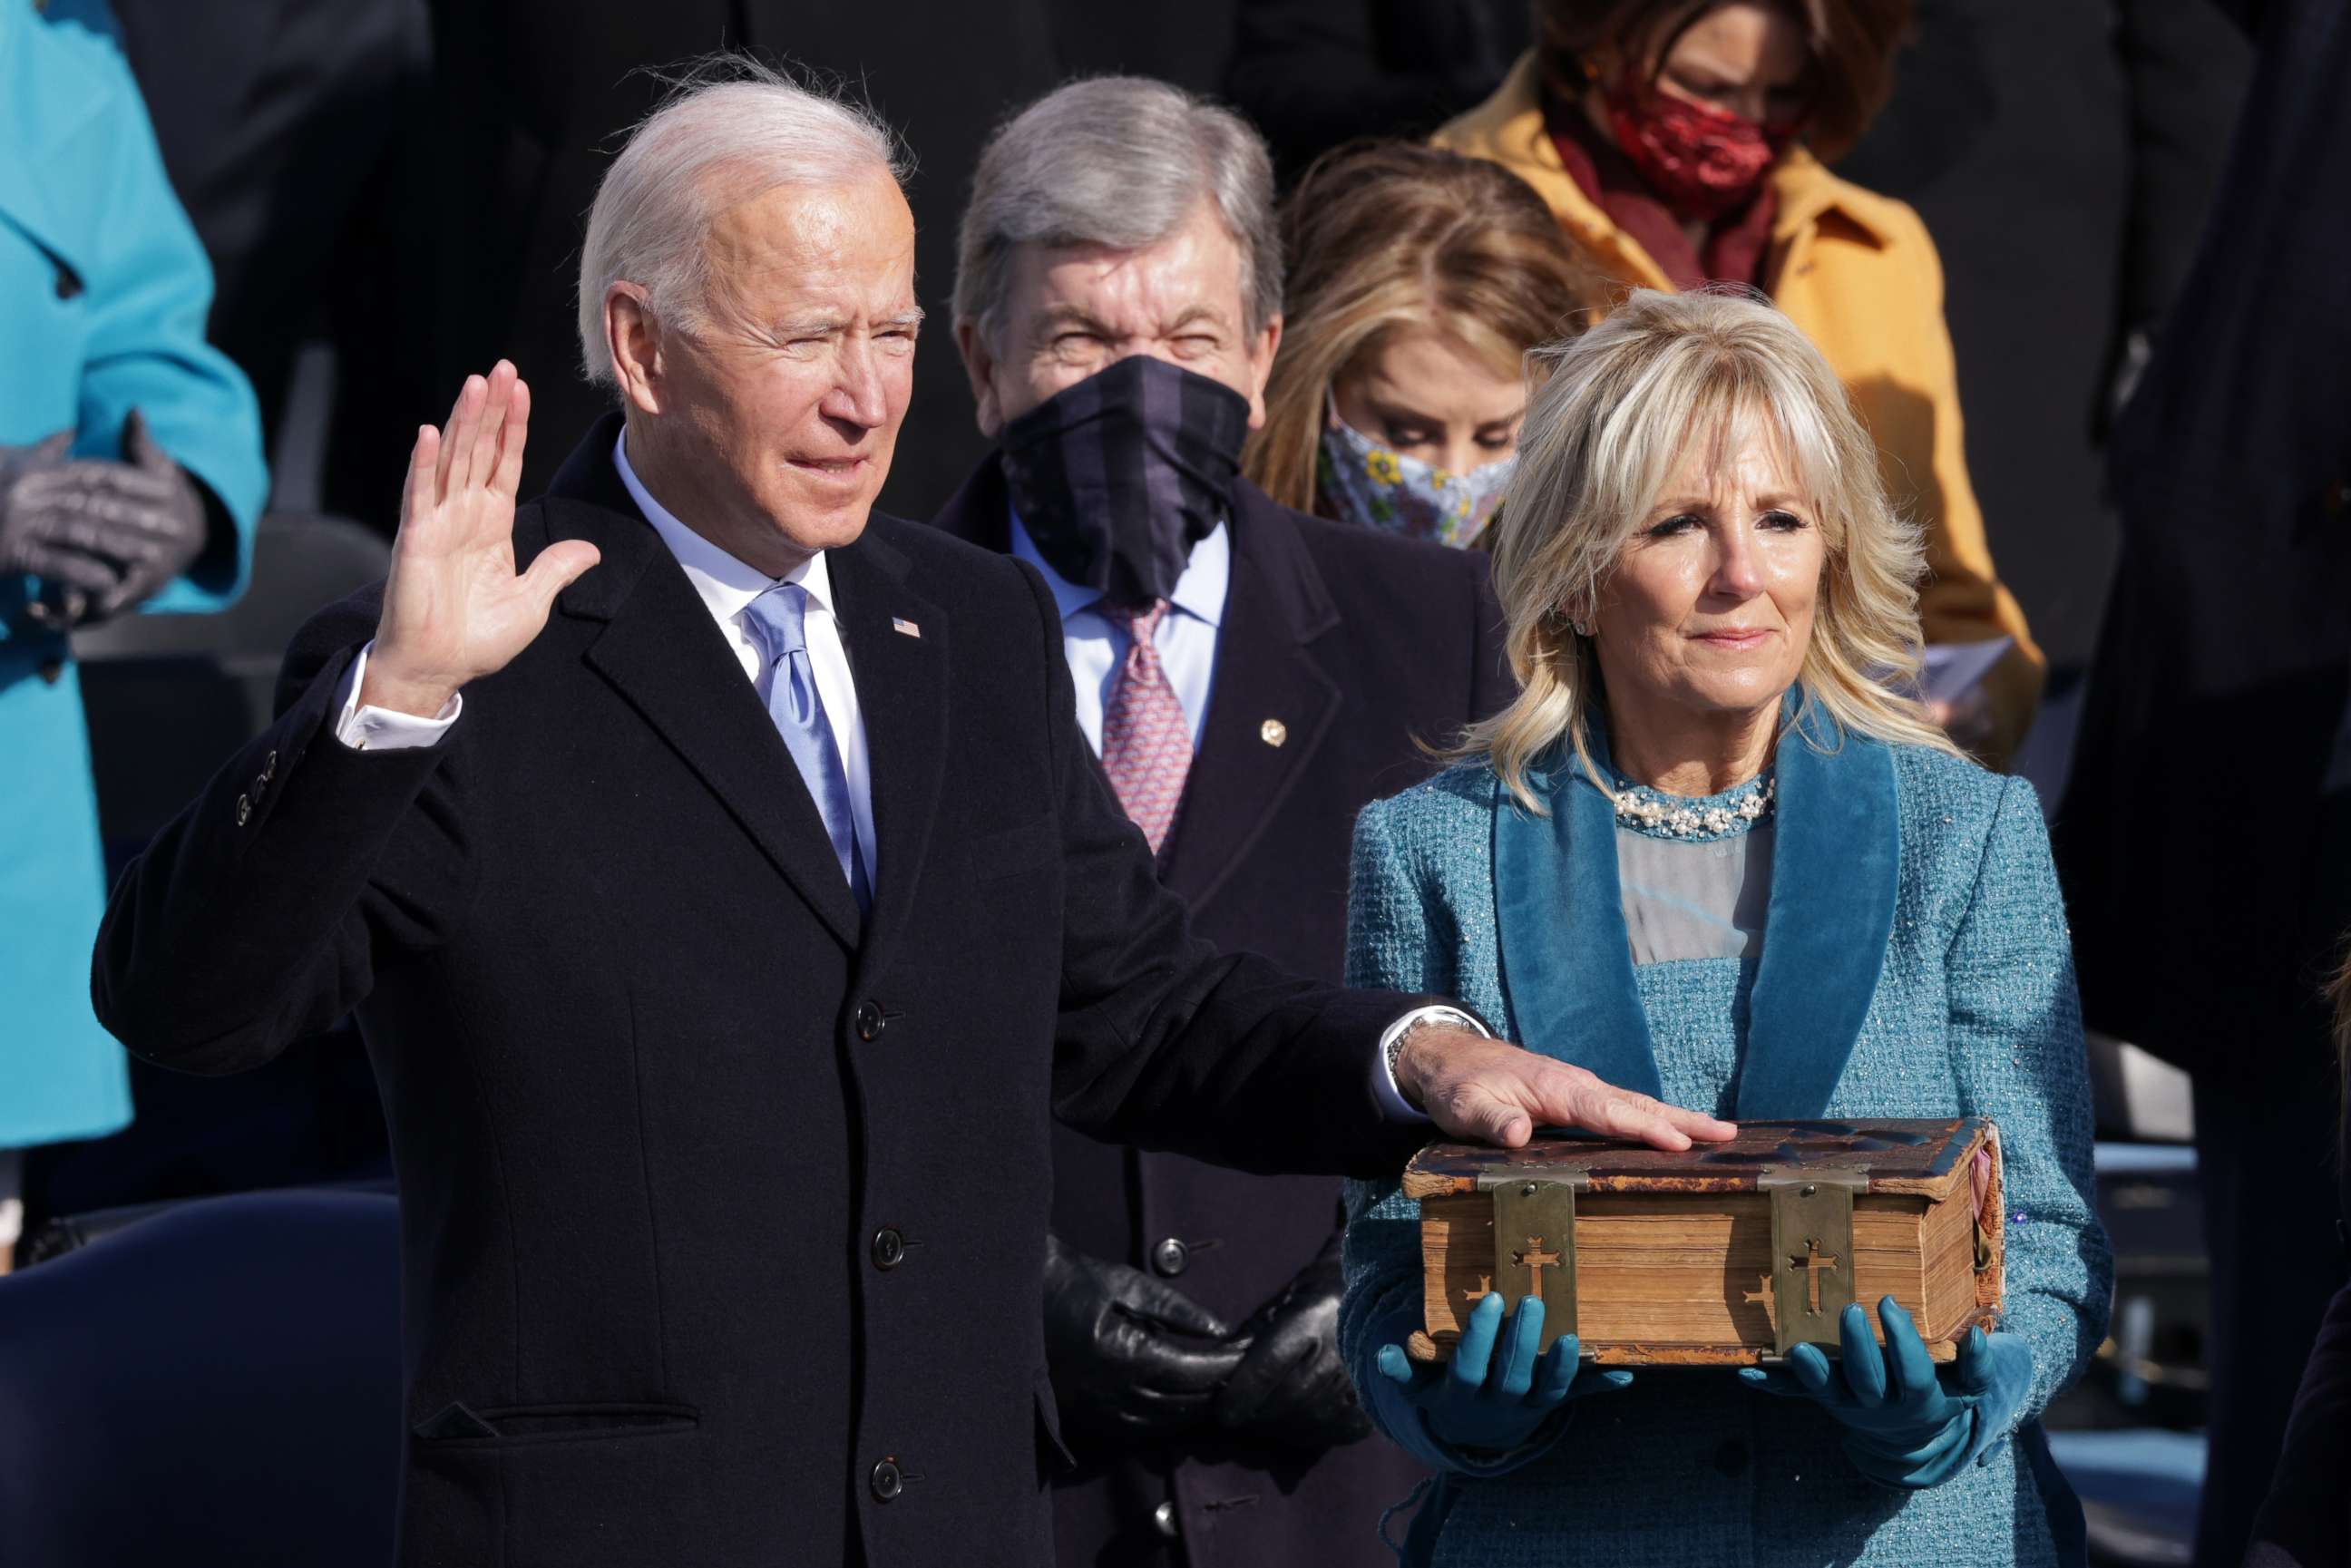 PHOTO: Joe Biden is sworn in as President as Jill Biden looks on during his inauguration on the West Front of the U.S. Capitol on Jan. 20, 2021, in Washington.